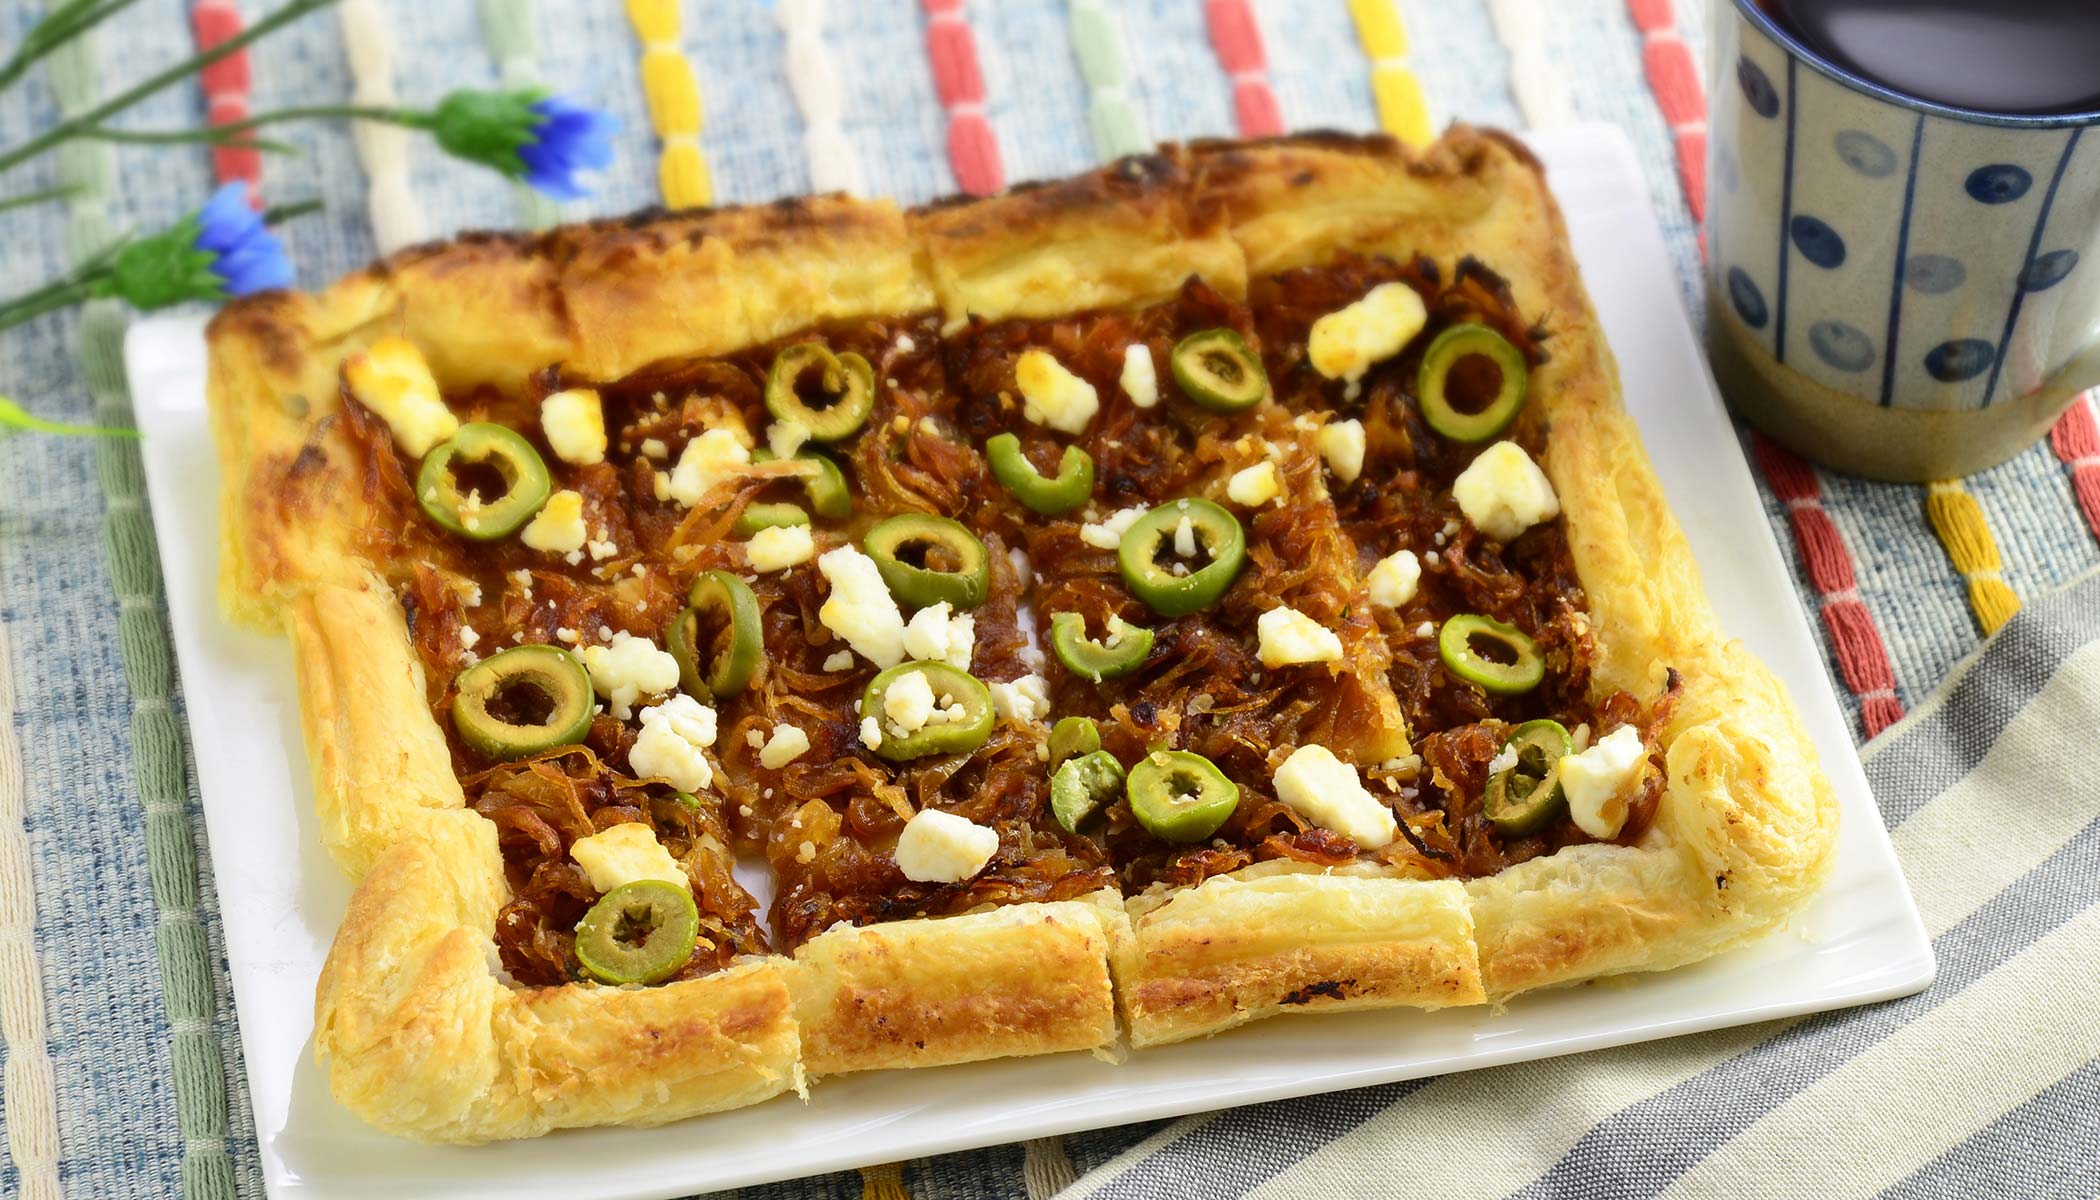 Zojirushi Recipe – French Onion Tart with Olives and Goat Cheese